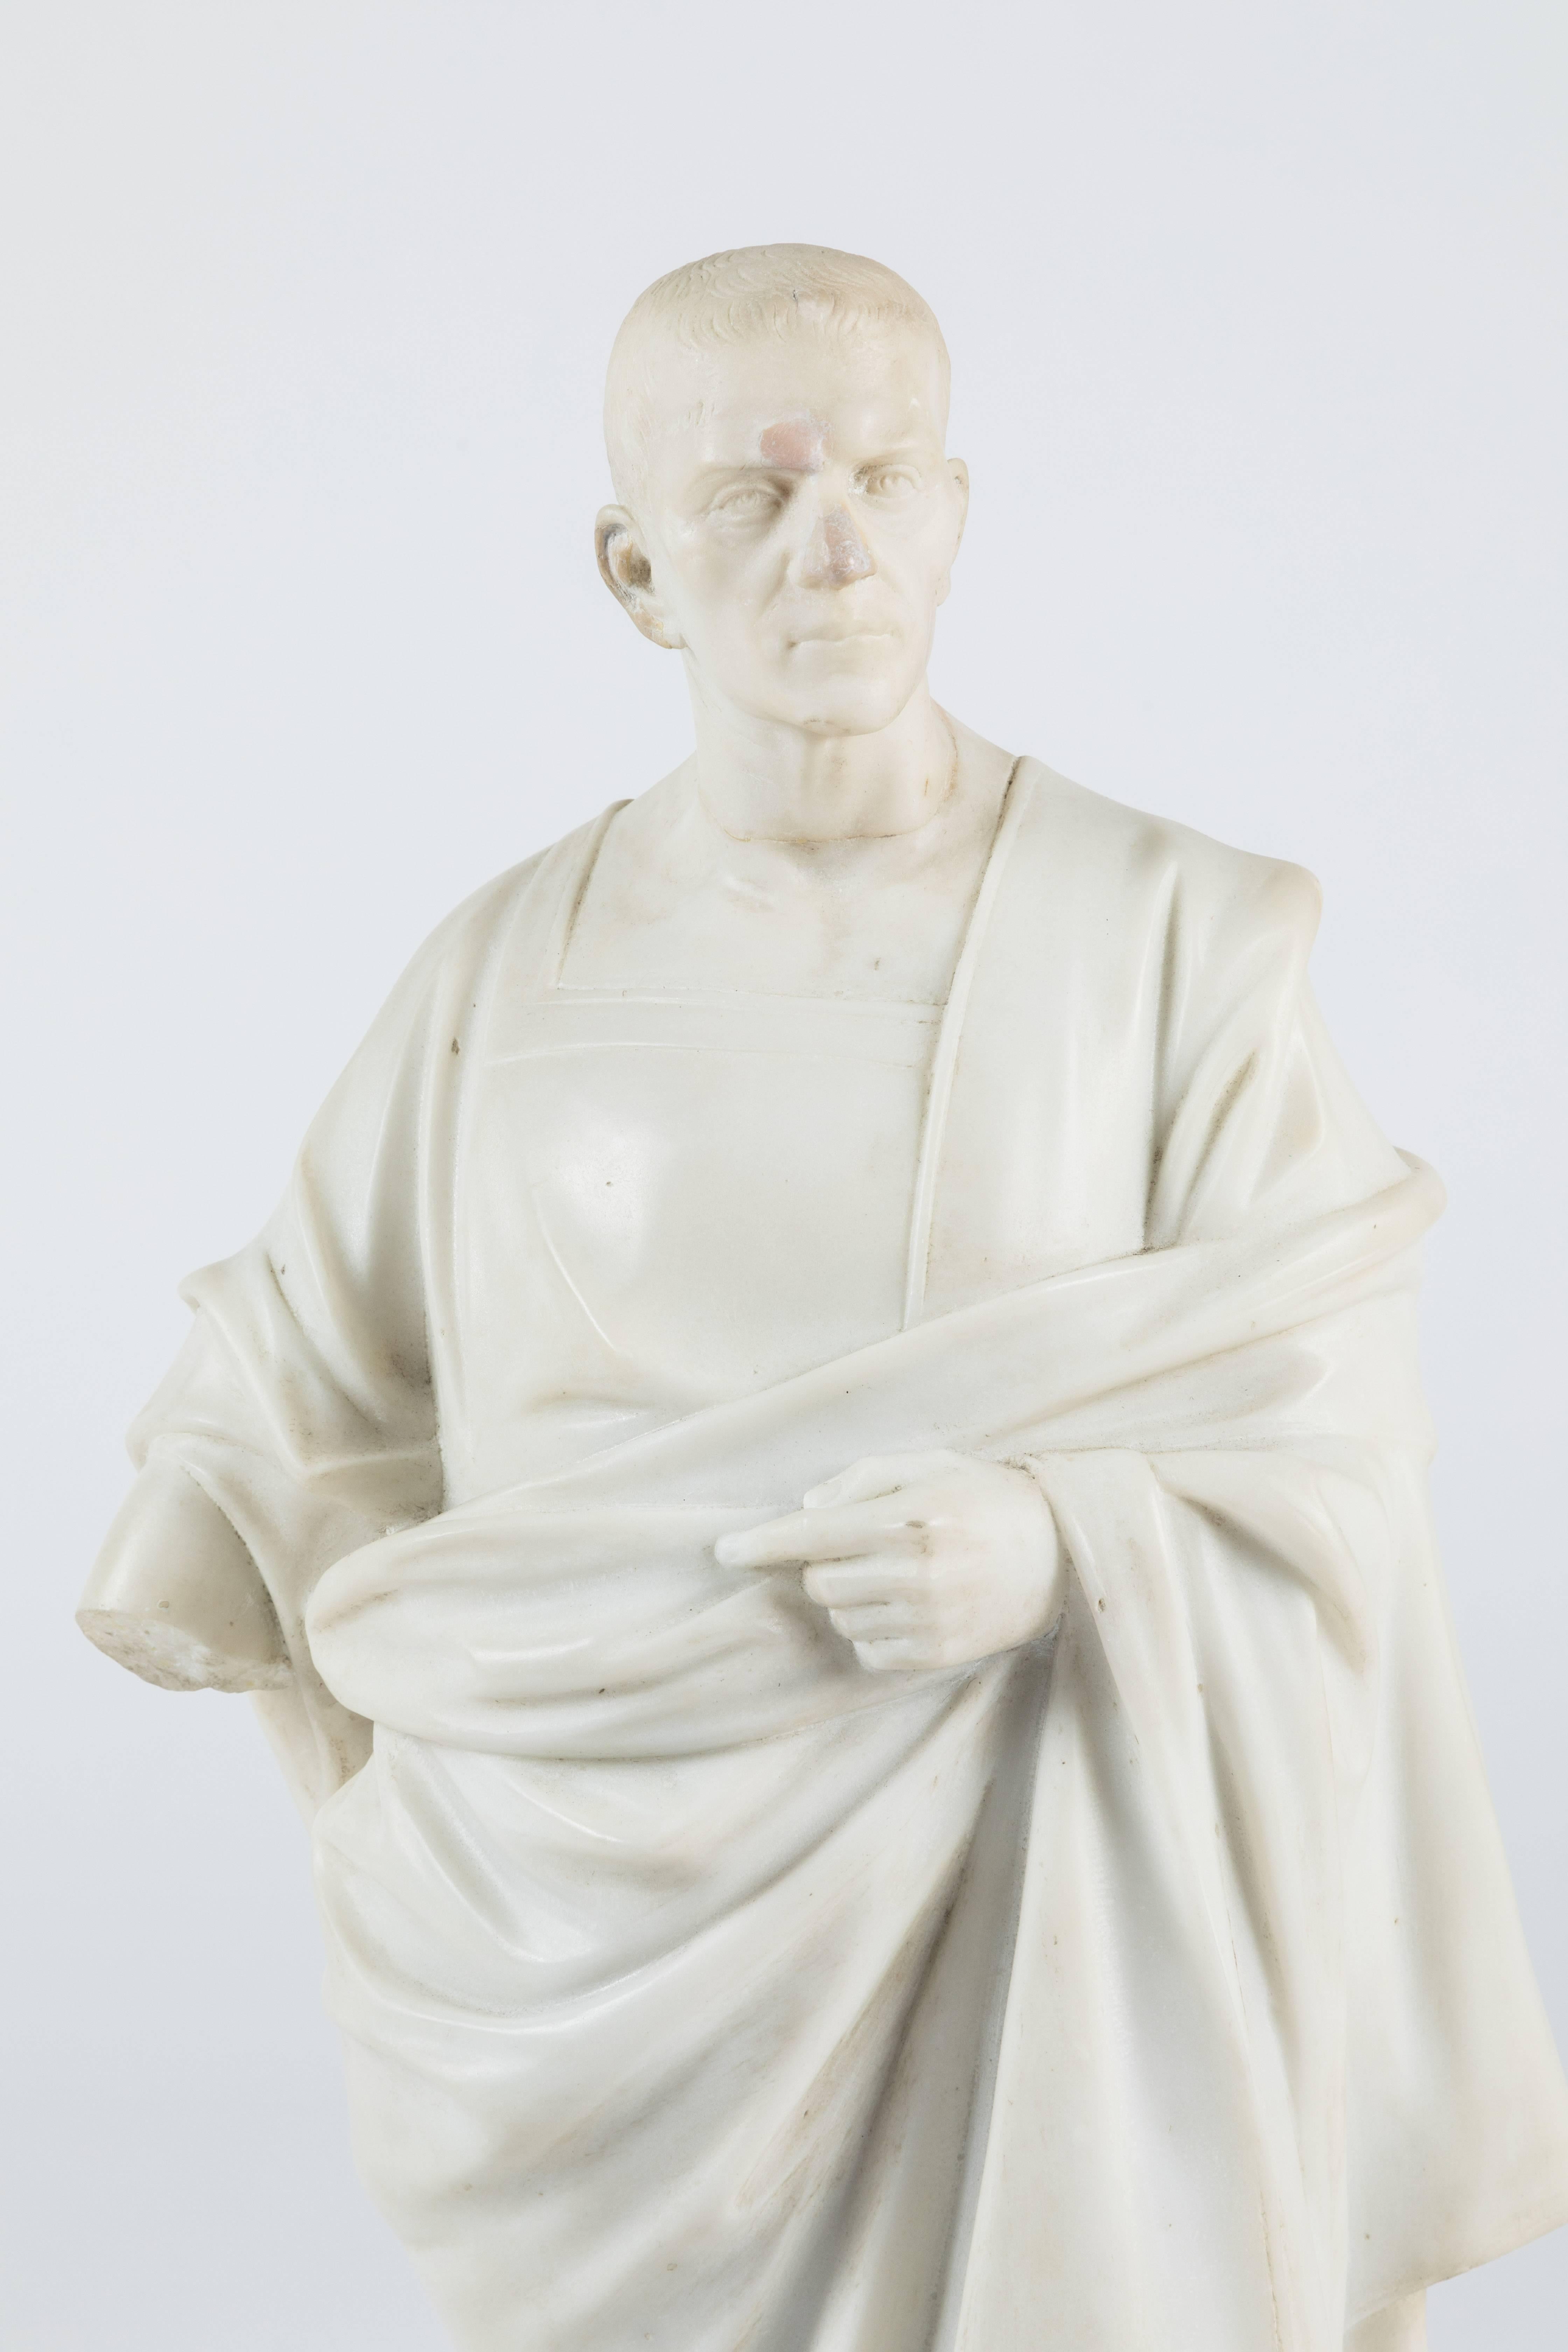 An intricately carved marble statue of a robed Roman official (possibly Marcus Tullius Cicero). This statue has extensive restorations so if you are looking for a perfect piece this one is not for you, but if you embrace a patina you are in luck.